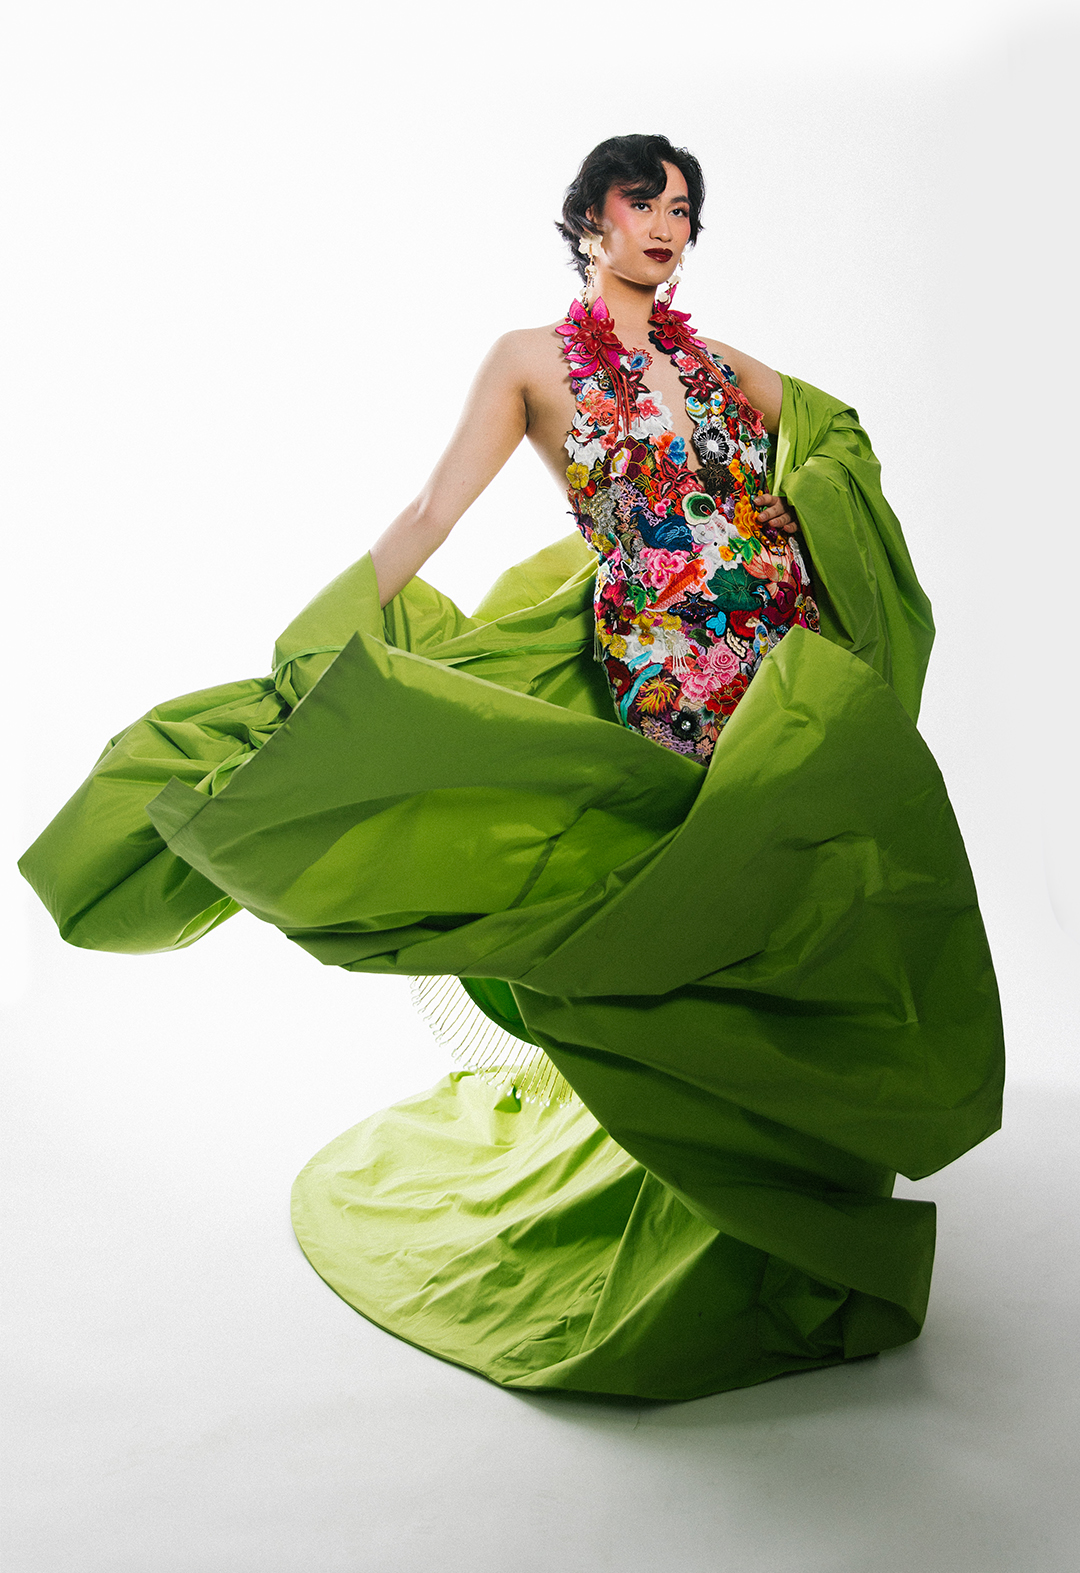 This is another image showing the model in both the collaged halter dress and spring-green taffeta opera coat. The model is in dramatic motion.